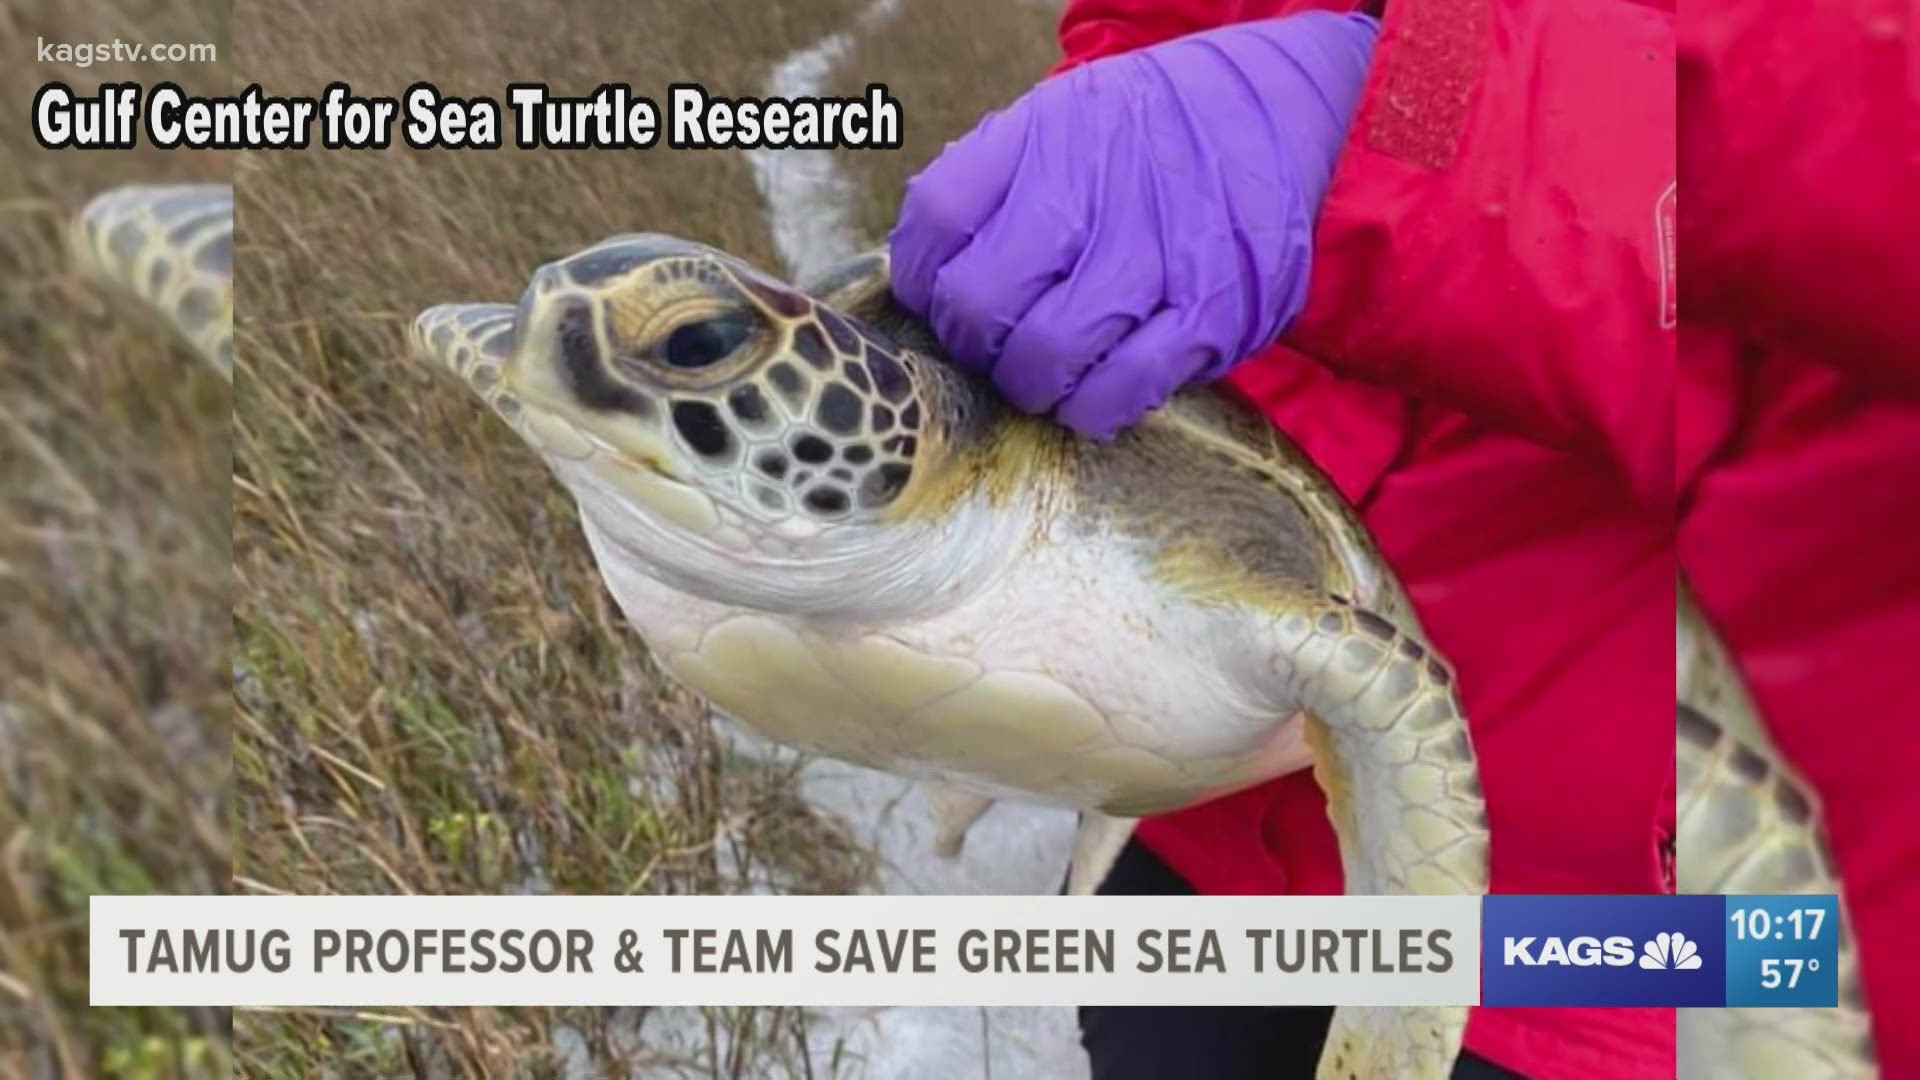 The Gulf Center for Sea Turtle Research in Galveston took charge during the winter weather and saved around 70 sea turtles.